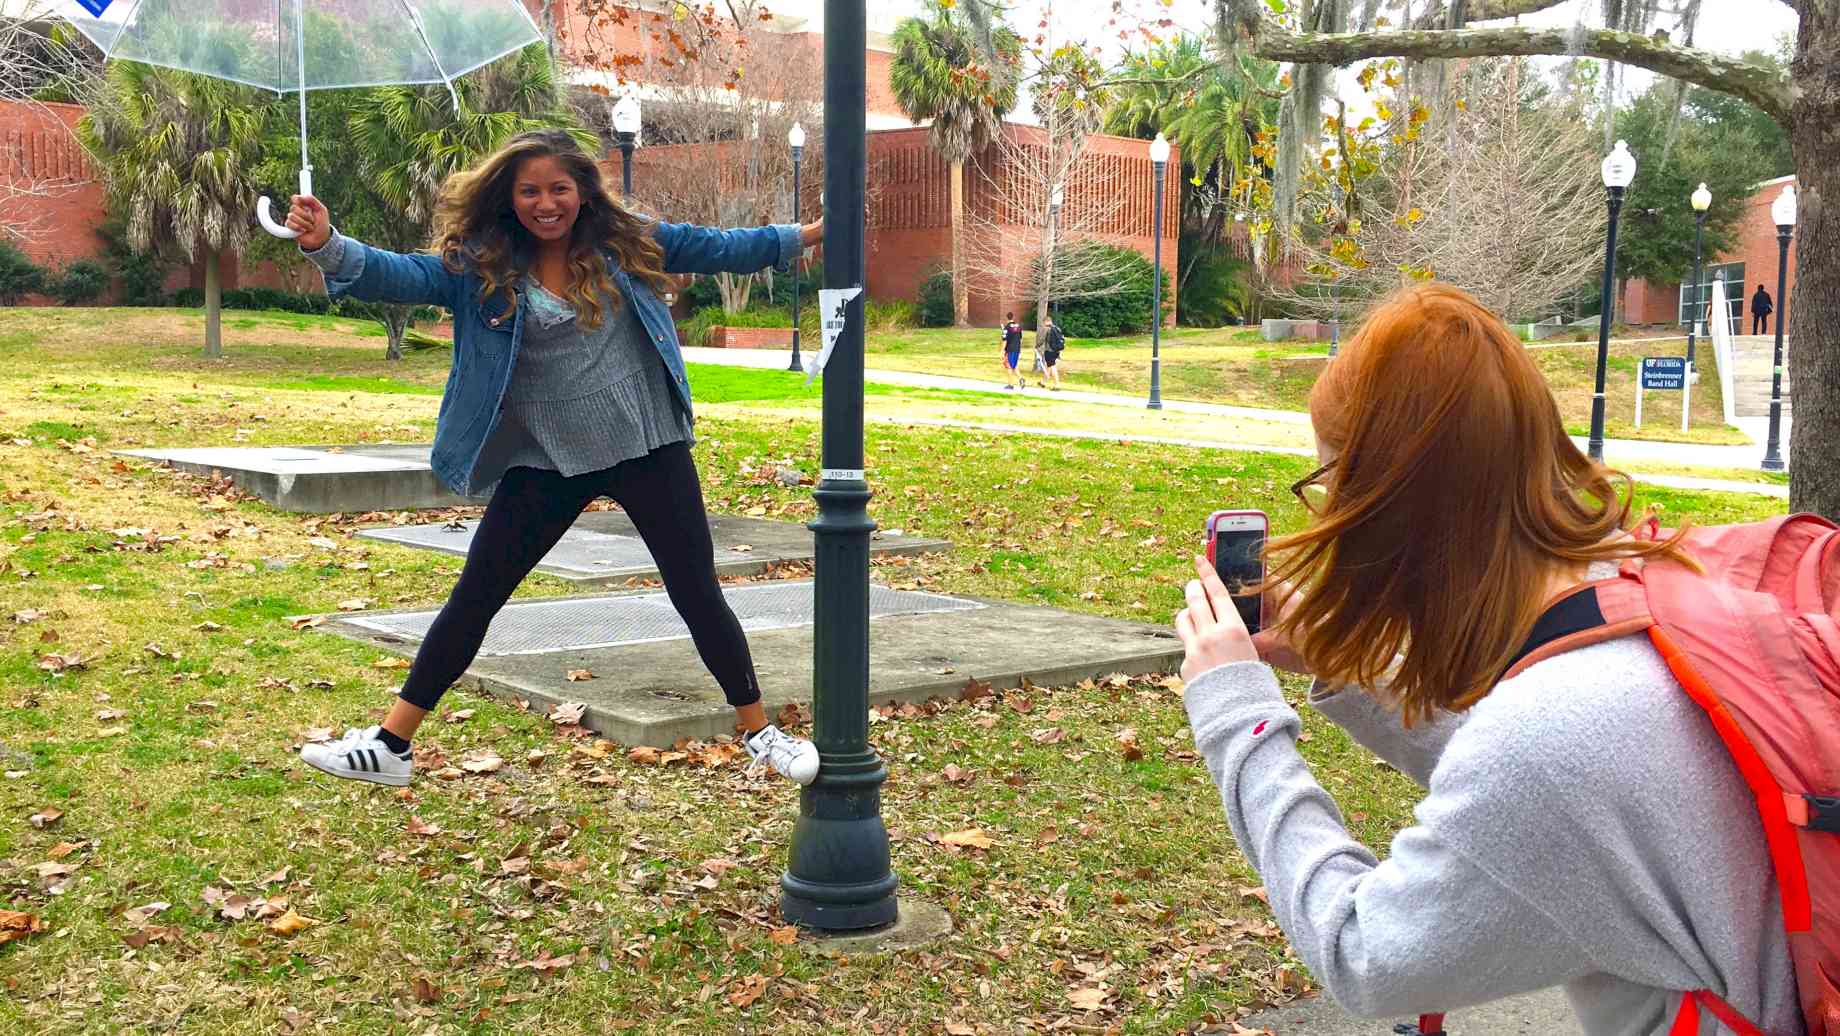 Curating content for social media means going out to find and create it. We spend much of our time outside the office to capture what really happens every day in the College of the Arts.